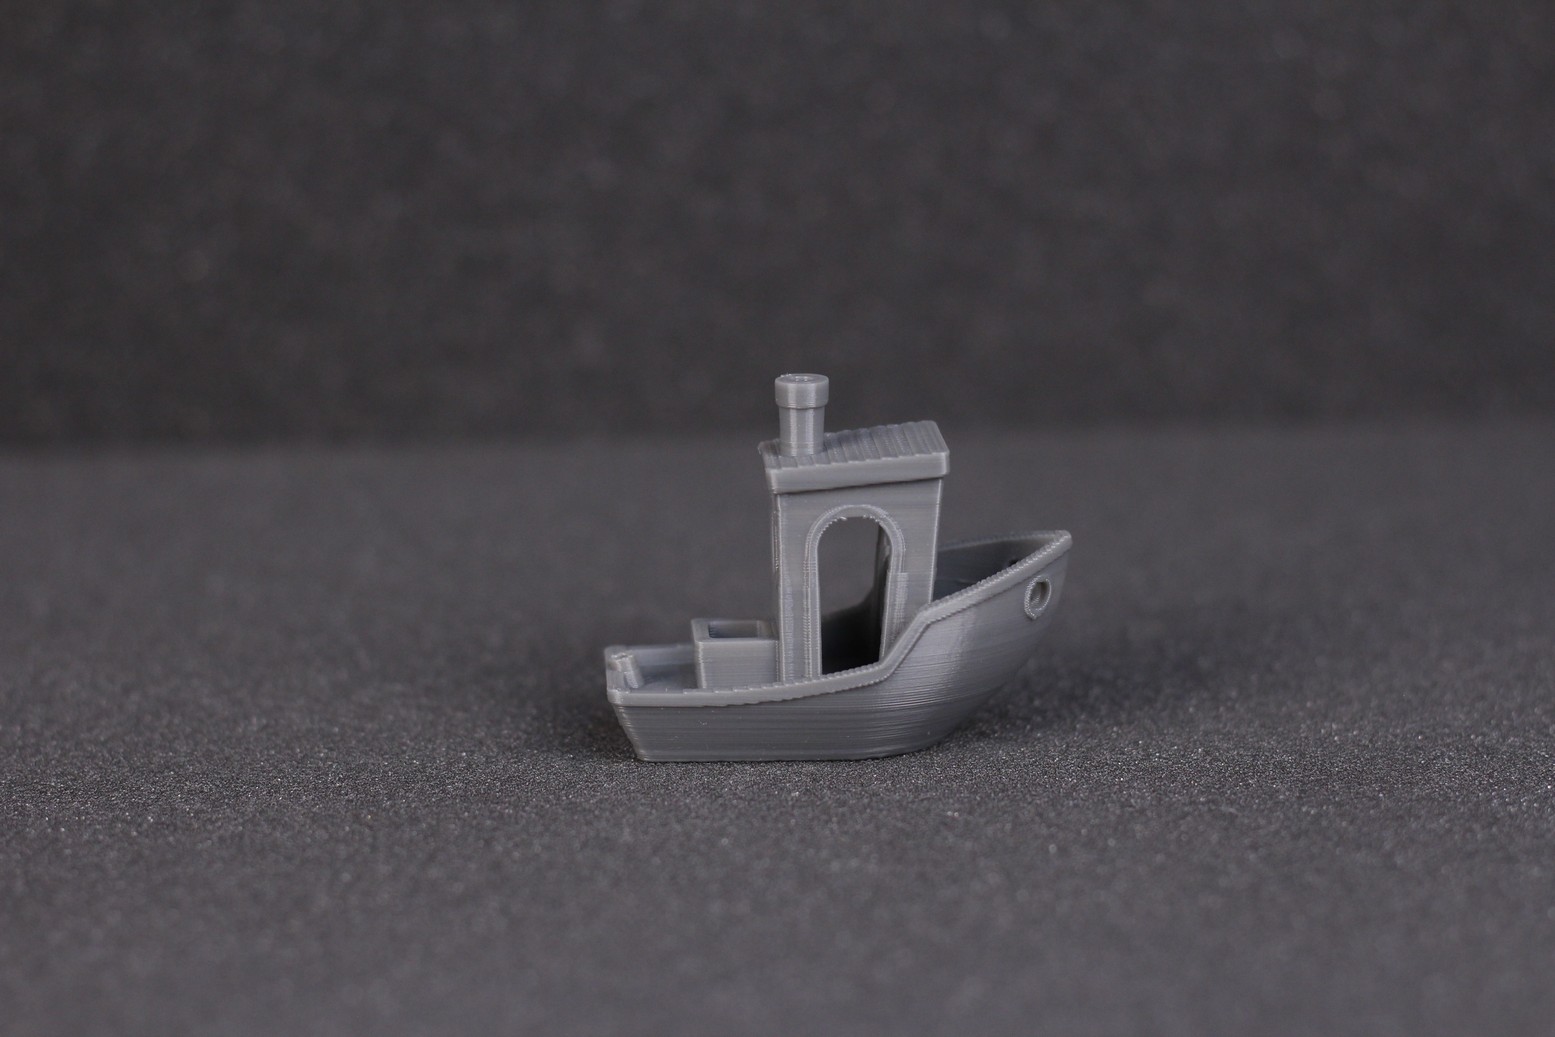 Second benchy on the LOTMAXX SC 10 Shark V2 2 | LOTMAXX SC-10 Shark V2 Review: Dual Color Printing and Laser Engraving